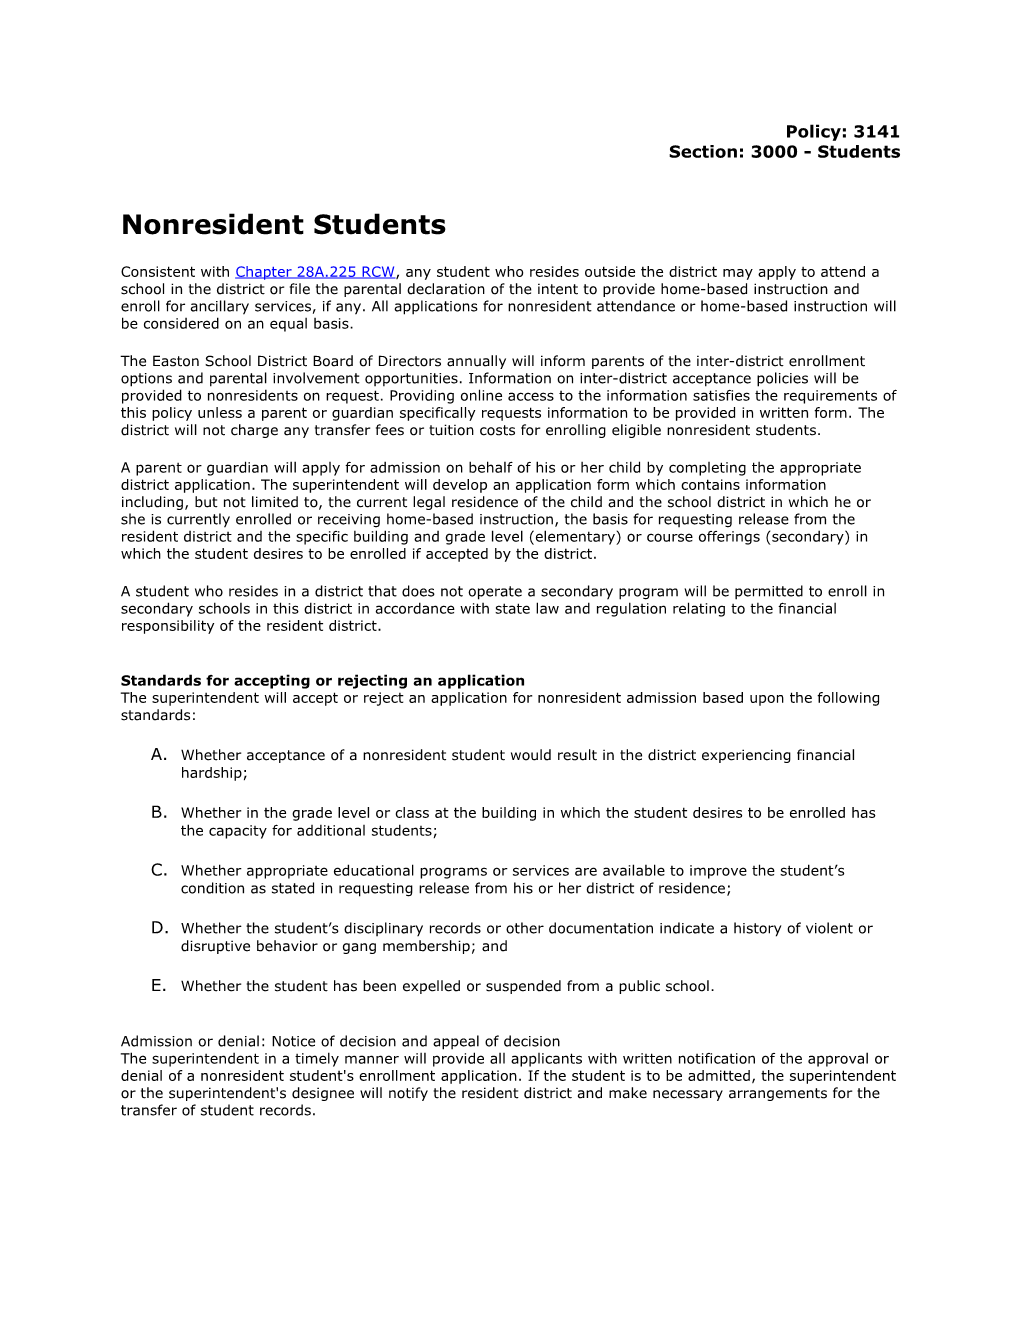 Nonresident Students